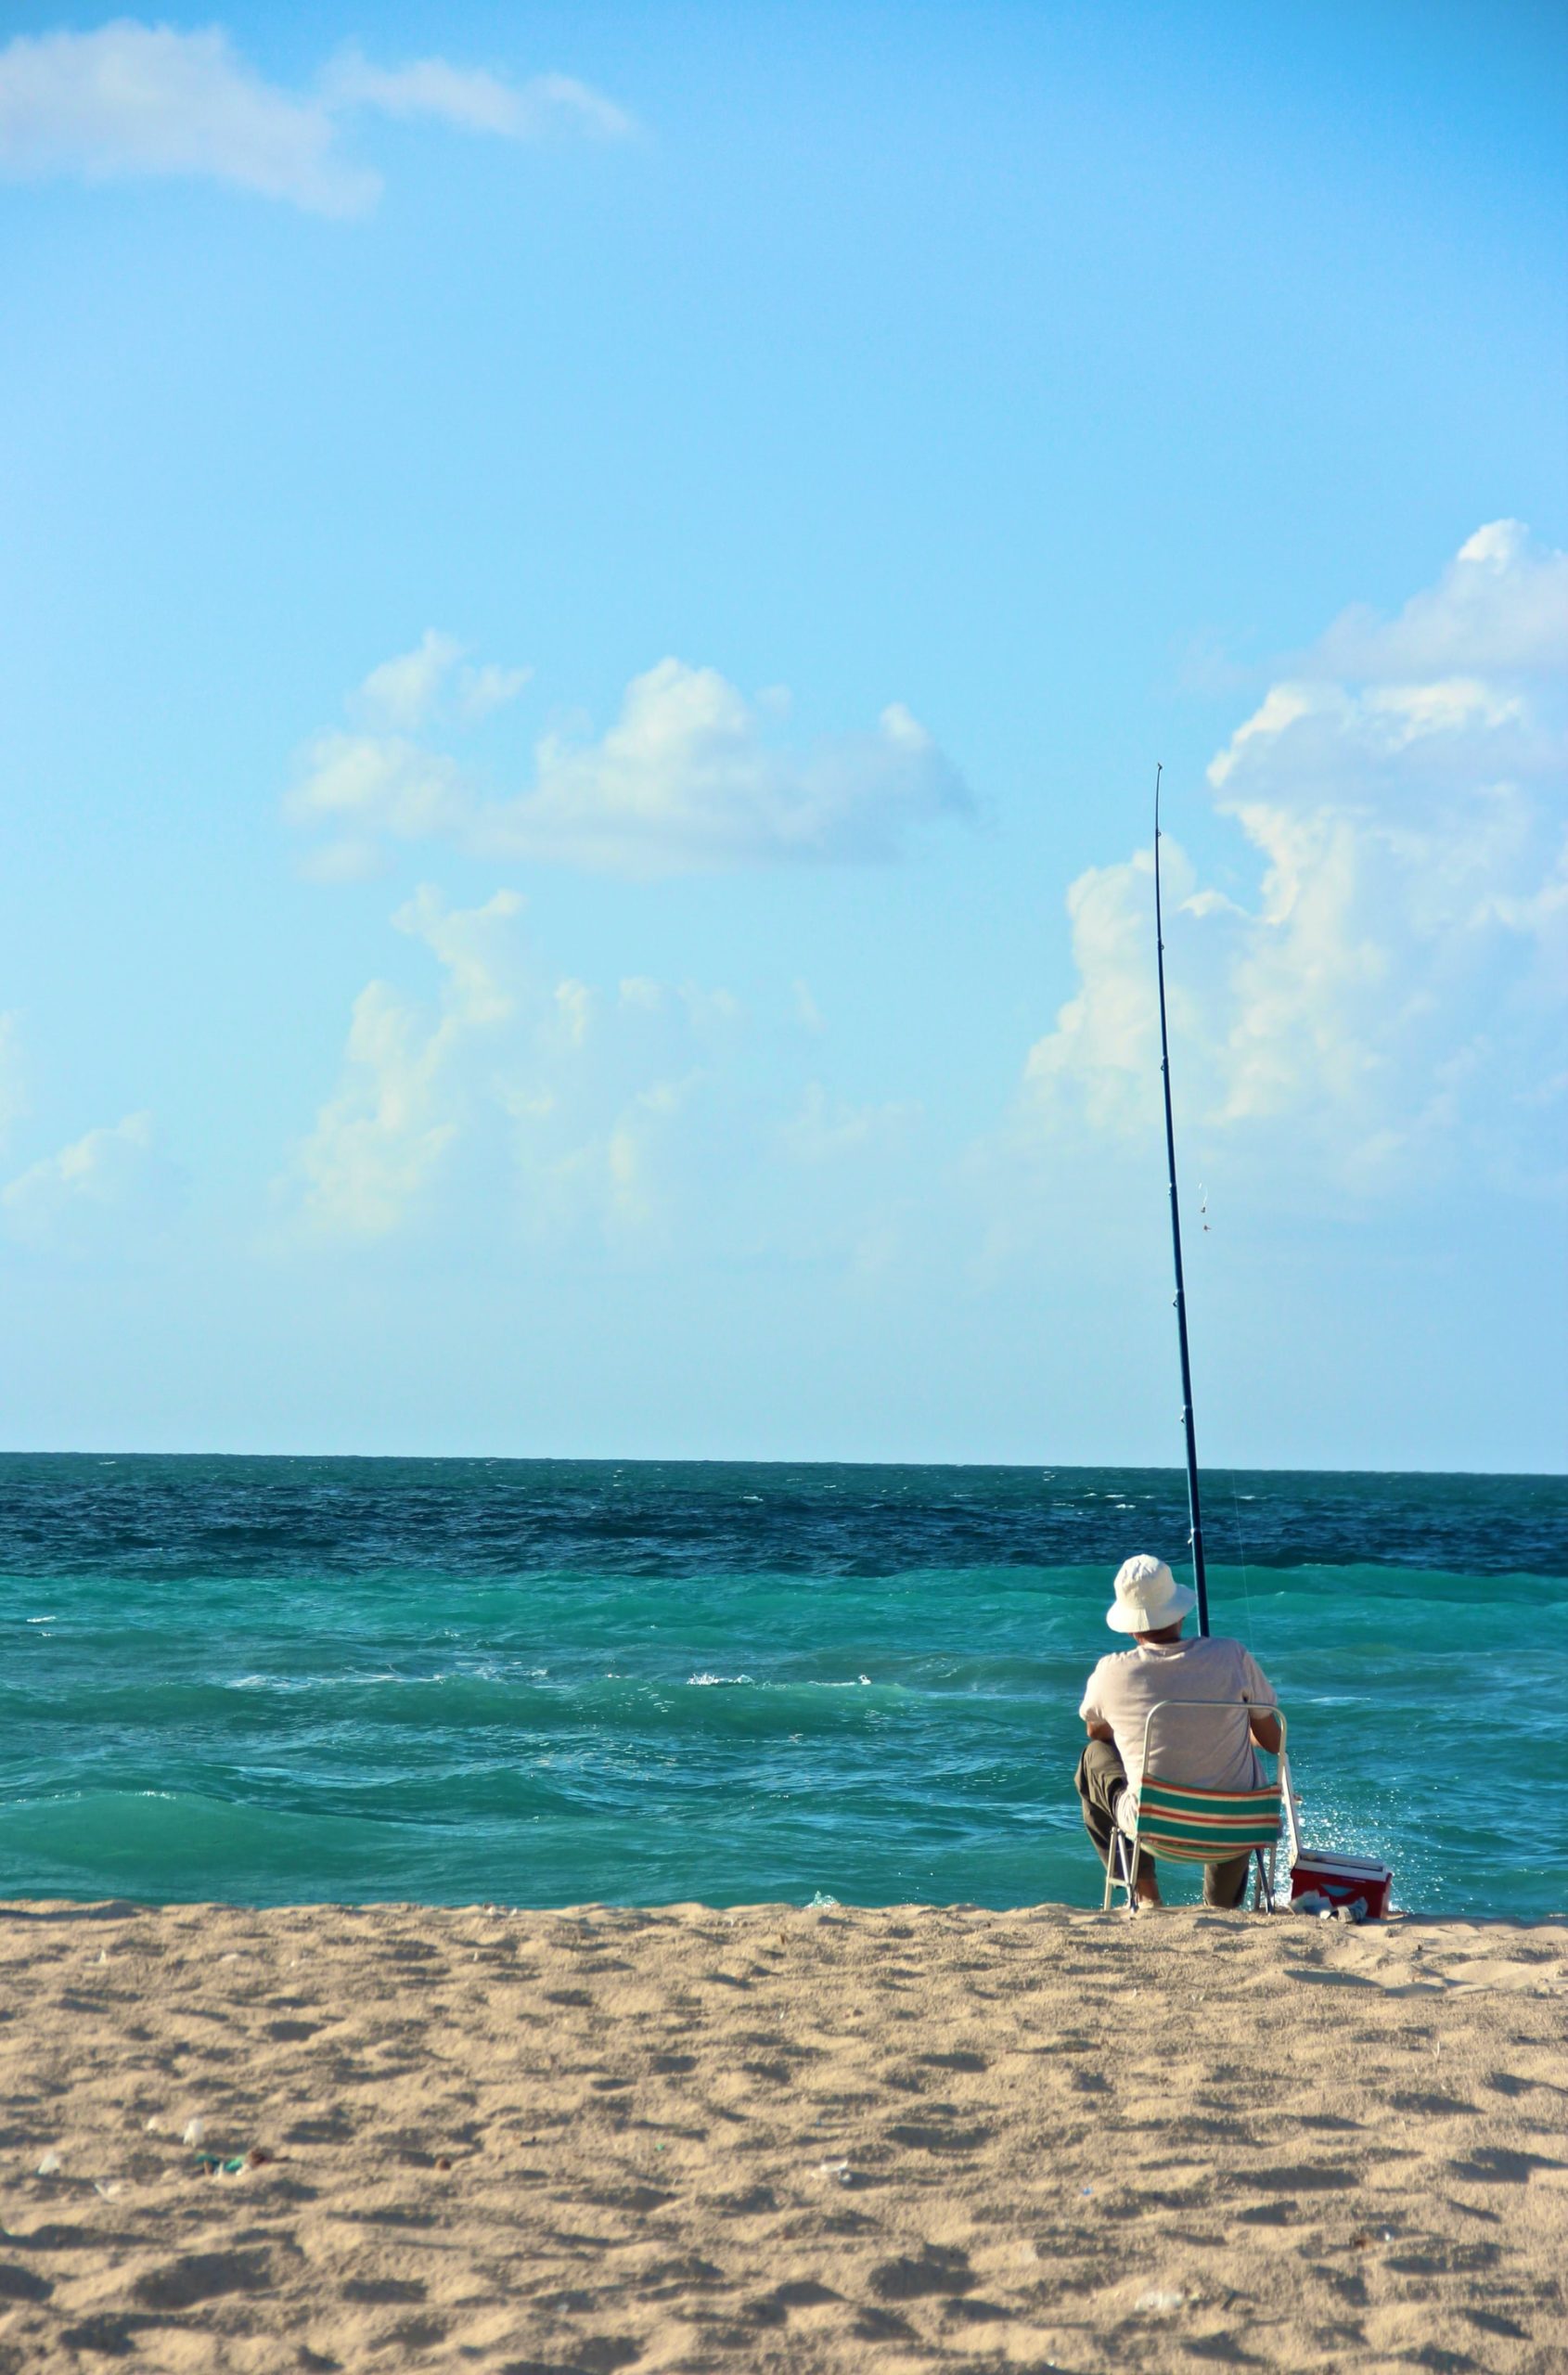 Top Tips To Planning A Fishing Trip